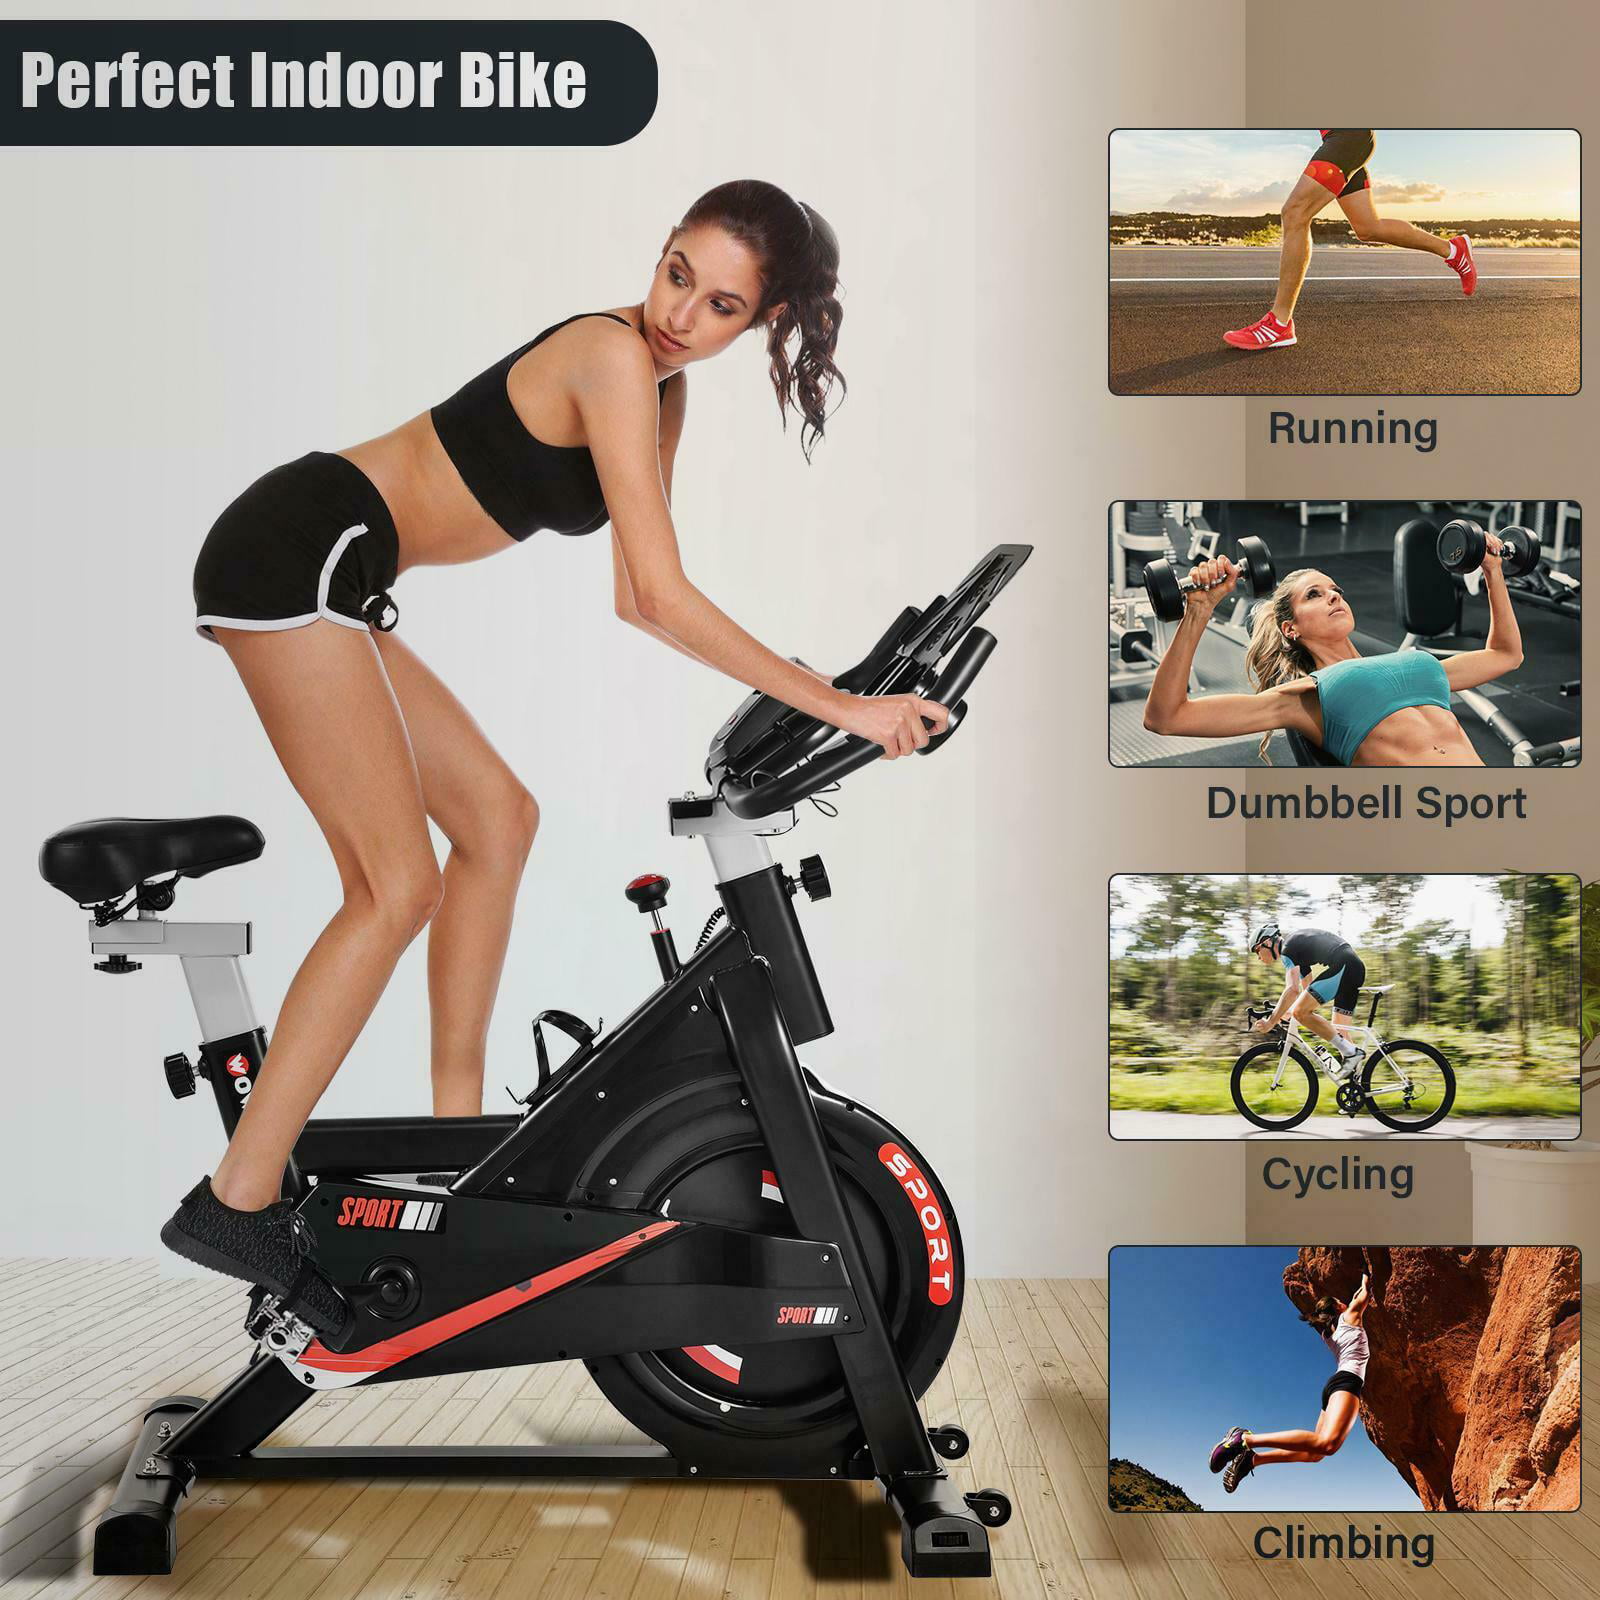 Details about   Black Exercise Stationary Bike Cycling Home Gym Cardio Workout Indoor Fitness AA 